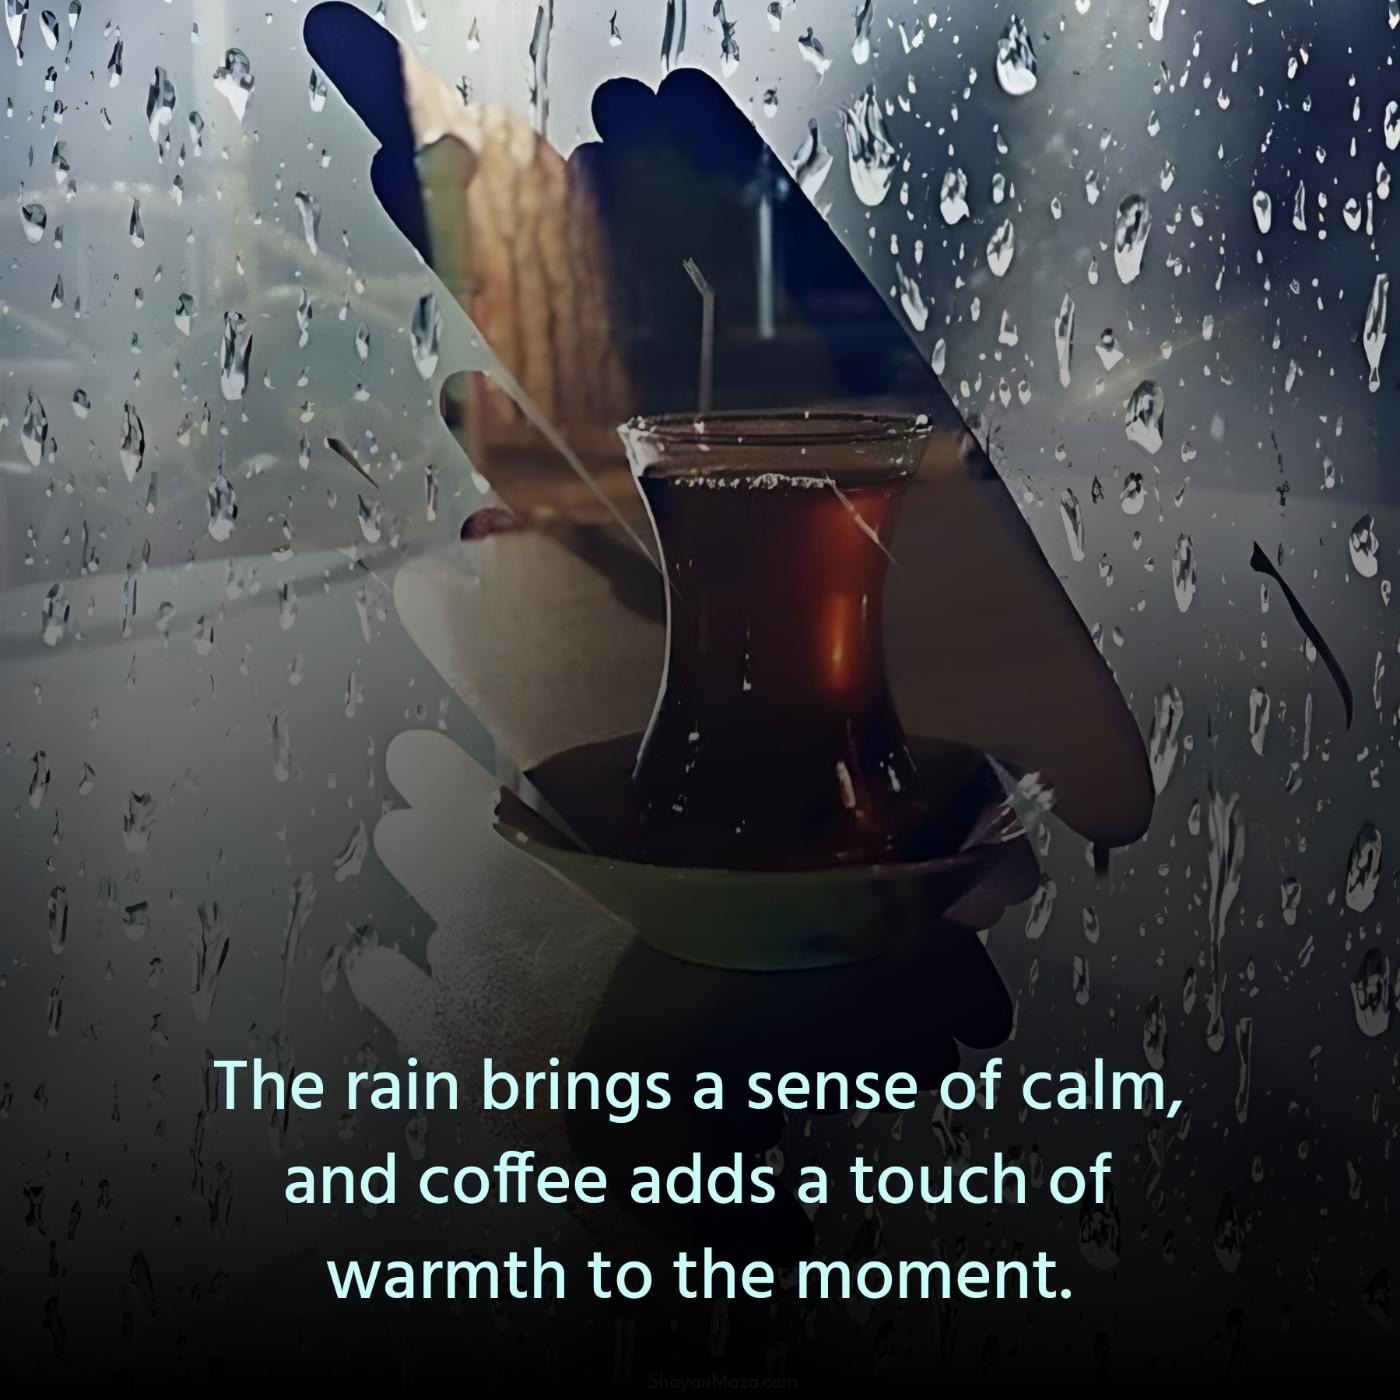 The rain brings a sense of calm and coffee adds a touch of warmth